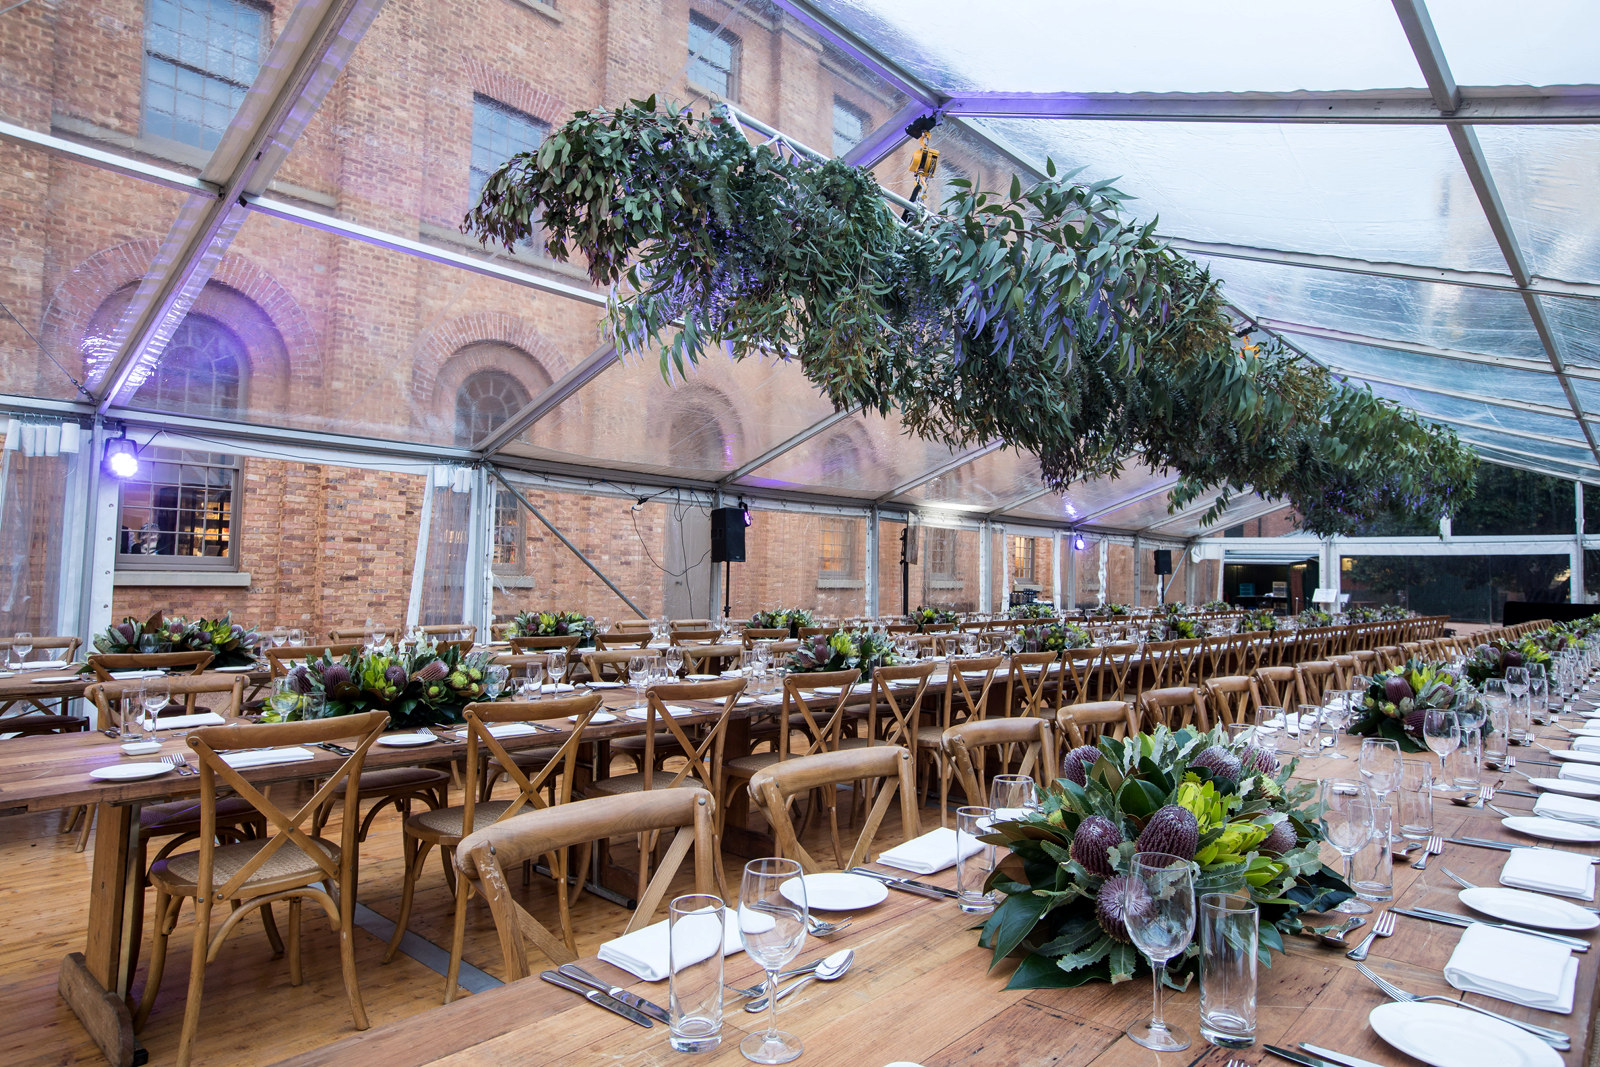 A marquee's table seating for an event in the southern courtyard of Hyde Park Barracks